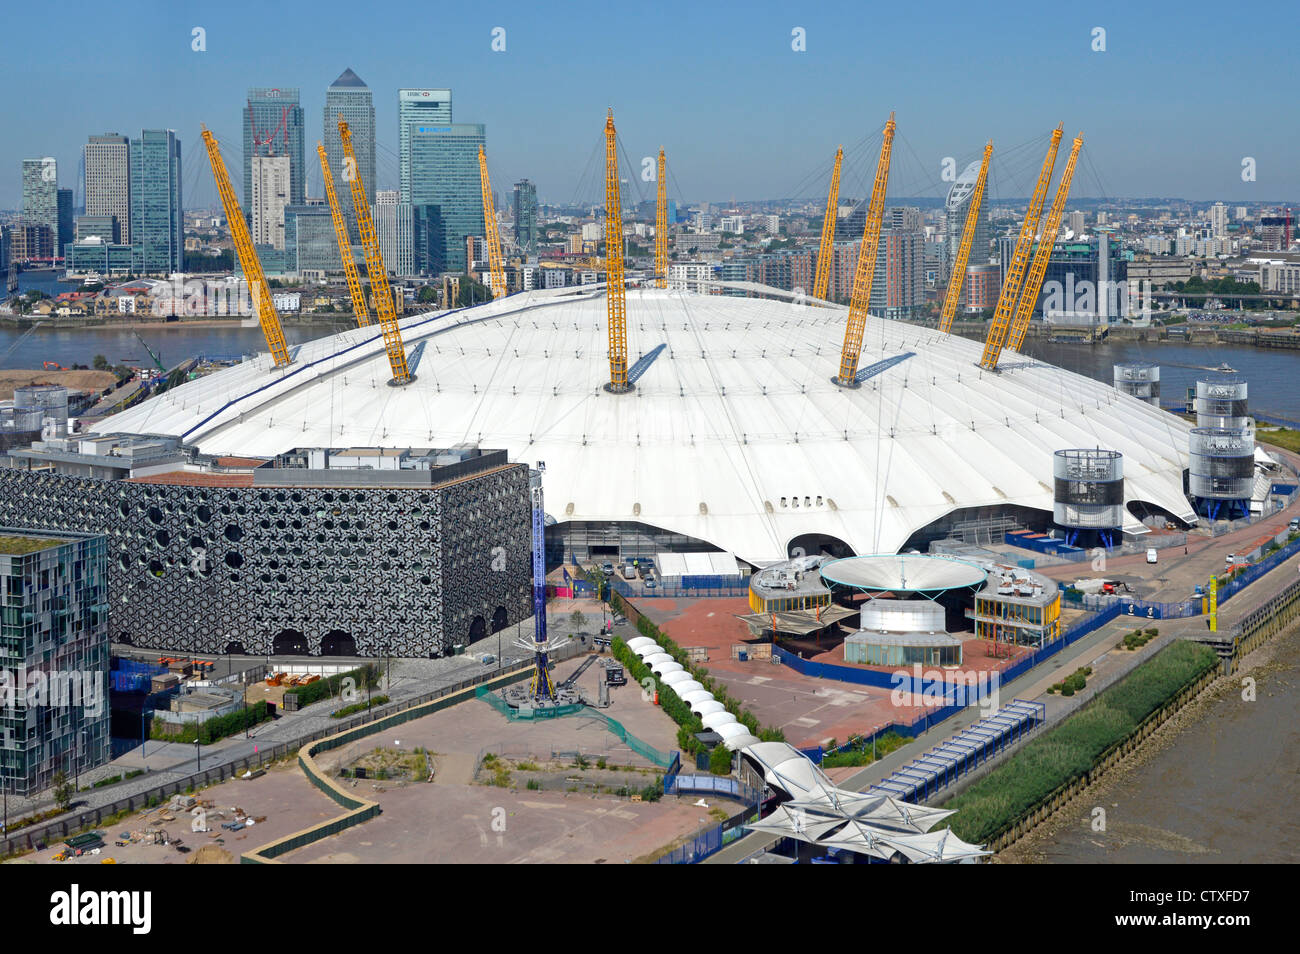 Aerial view O2 dome arena London 2012 Olympic venue on the Greenwich Peninsula with Canary Wharf banking skyline beyond Stock Photo